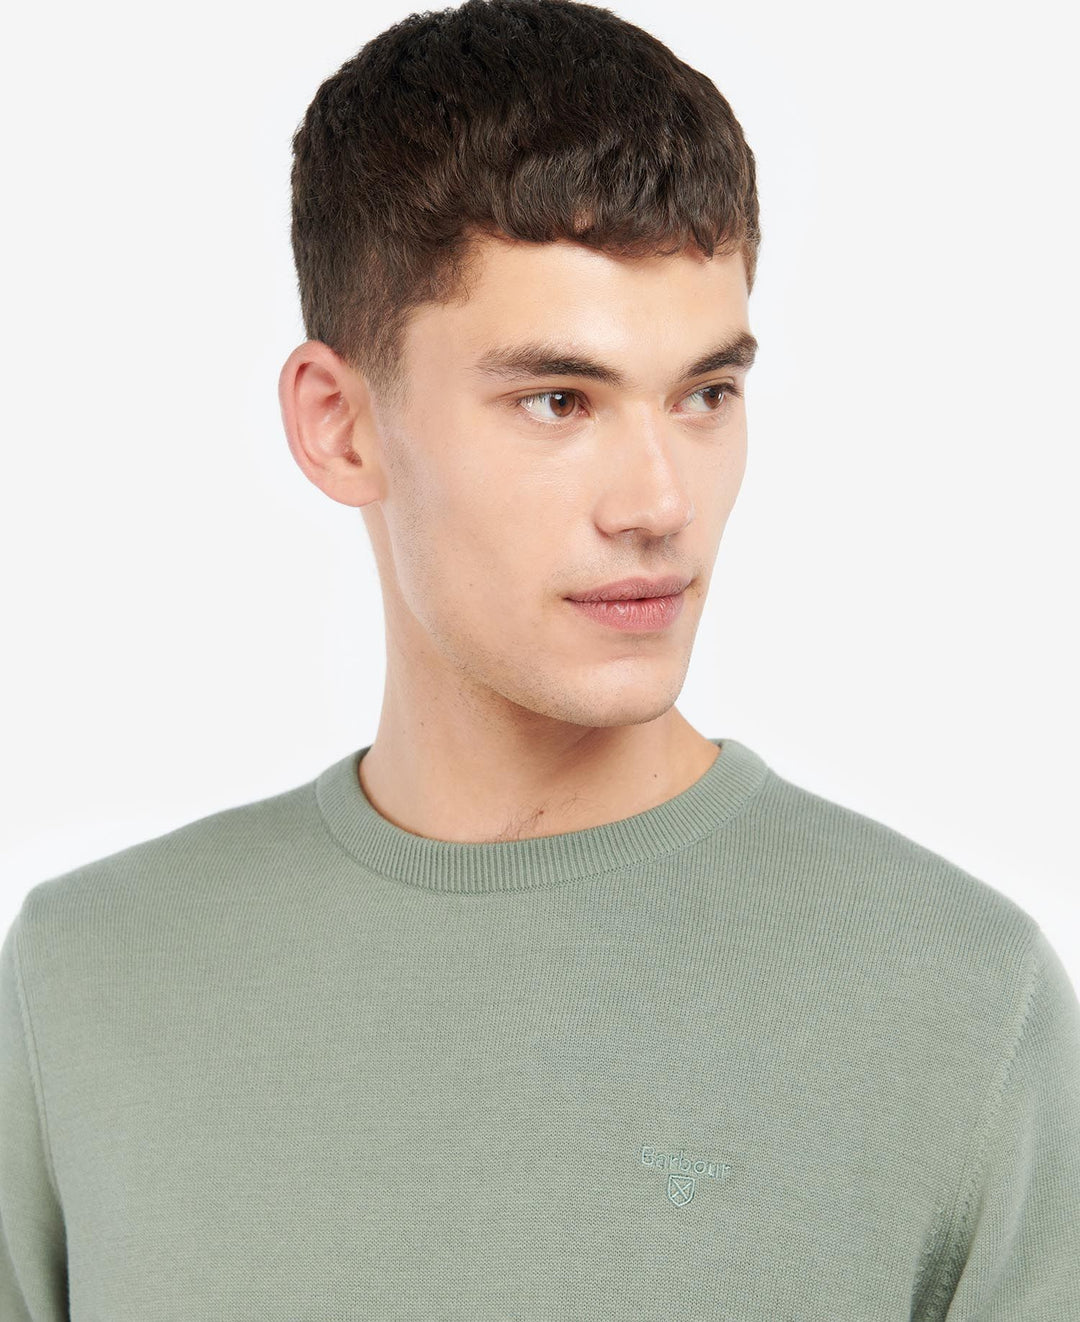 BARBOUR PIMA COTTON CREW - AGAVE GREEN